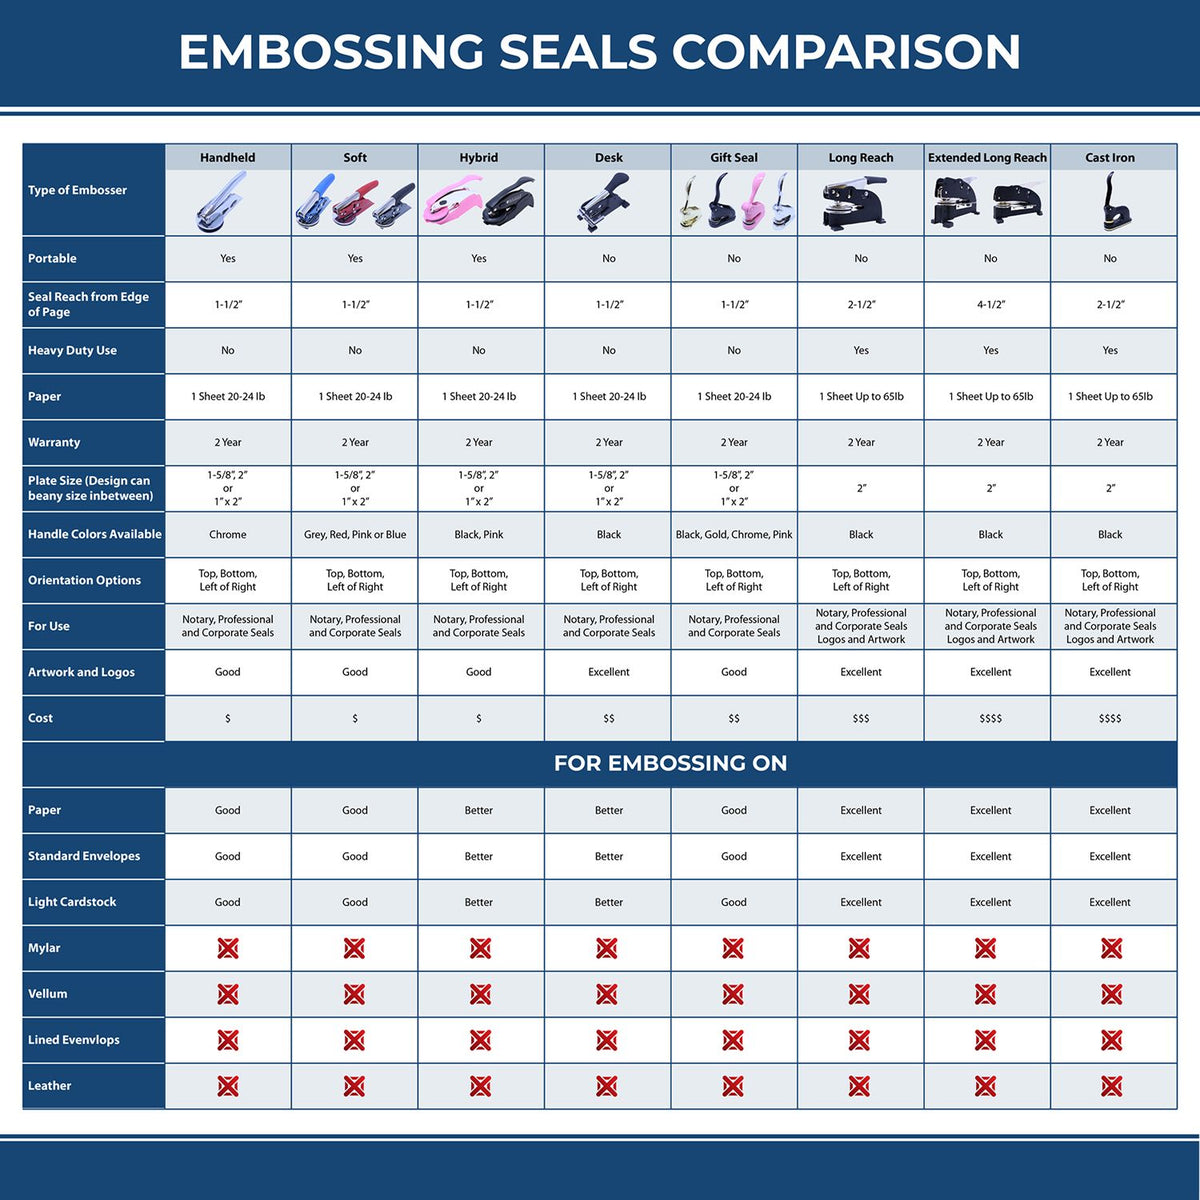 A comparison chart for the different types of mount models available for the Indiana Desk Surveyor Seal Embosser.